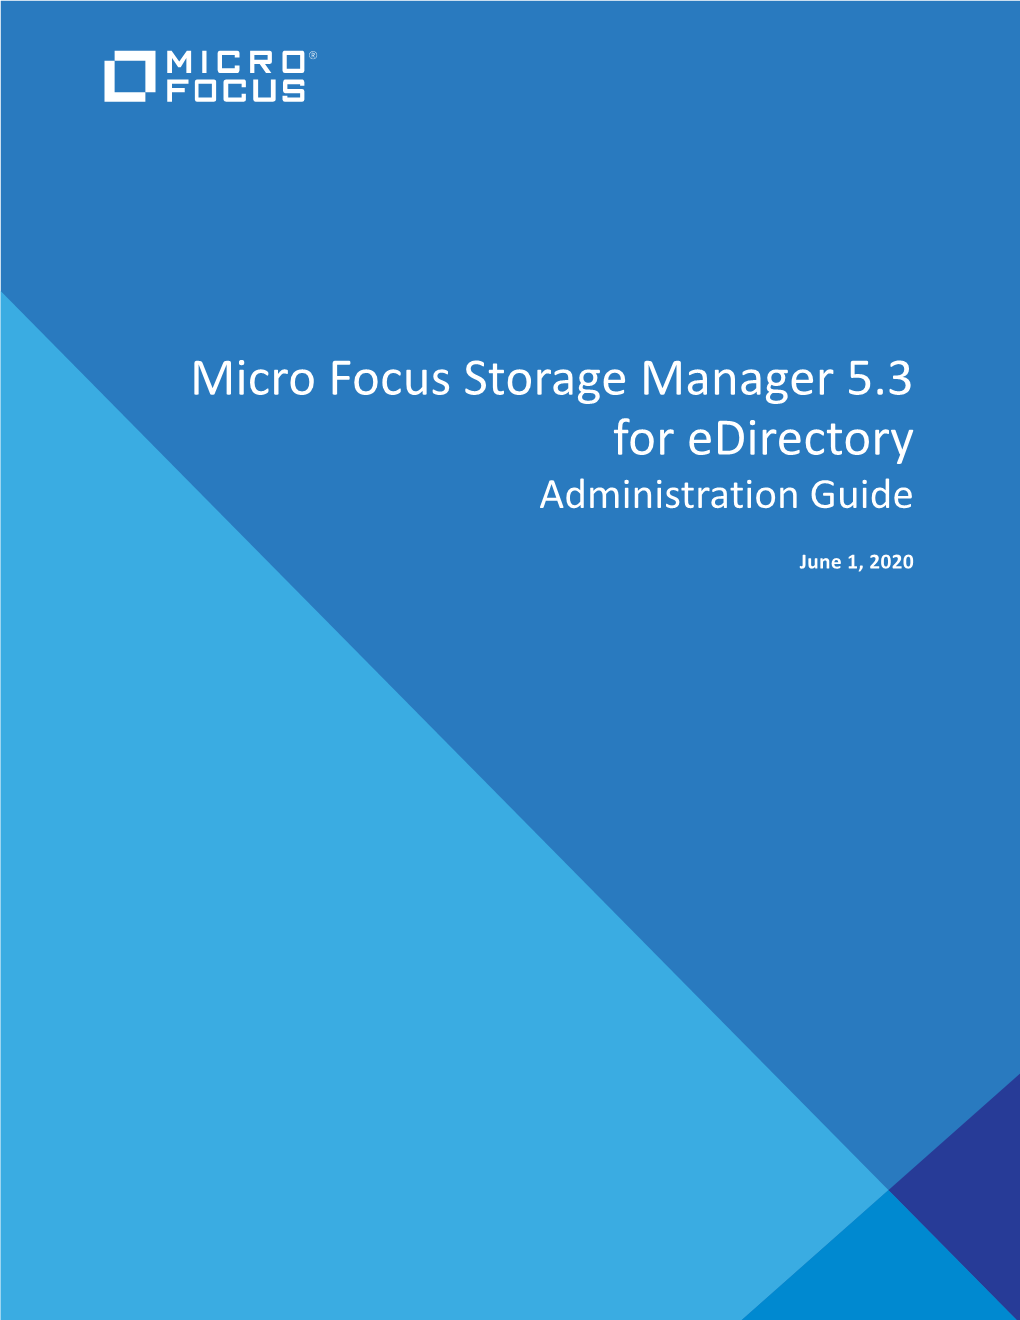 Micro Focus Storage Manager 5.3 for Edirectory Administration Guide